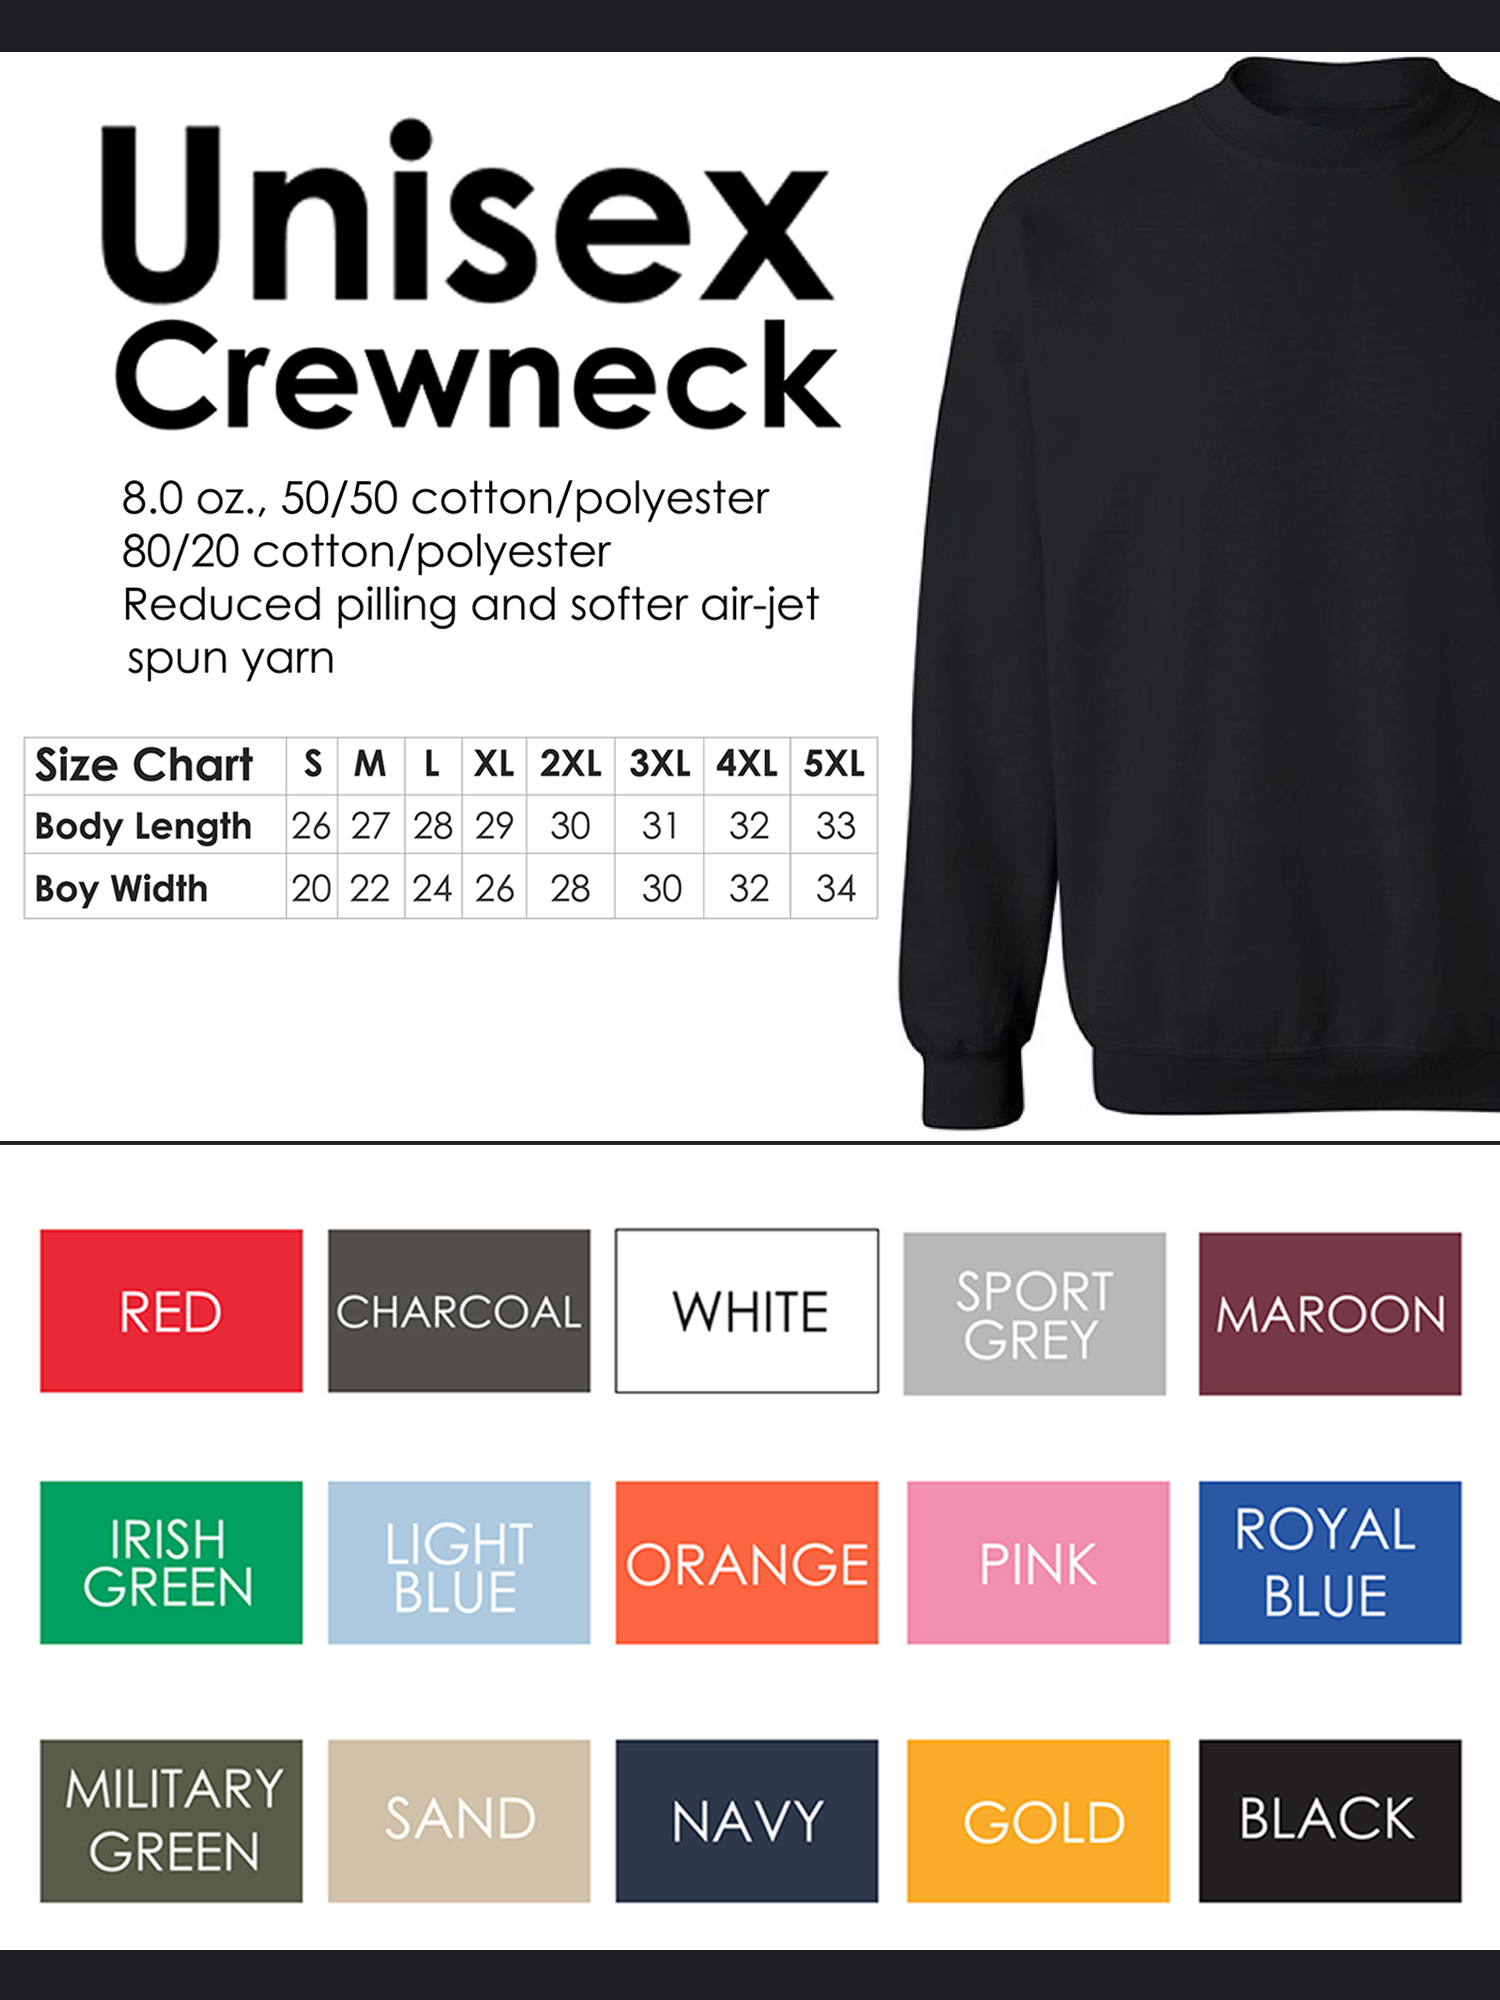 Awkward Styles Black Crewneck for Camper Happy Camper Unisex Crewneck Camper Sweater for Men Happy Camper Crewneck for Women Camping Clothes Happy Camper Crewneck Campers Gifts Sweater for Camper - image 5 of 5